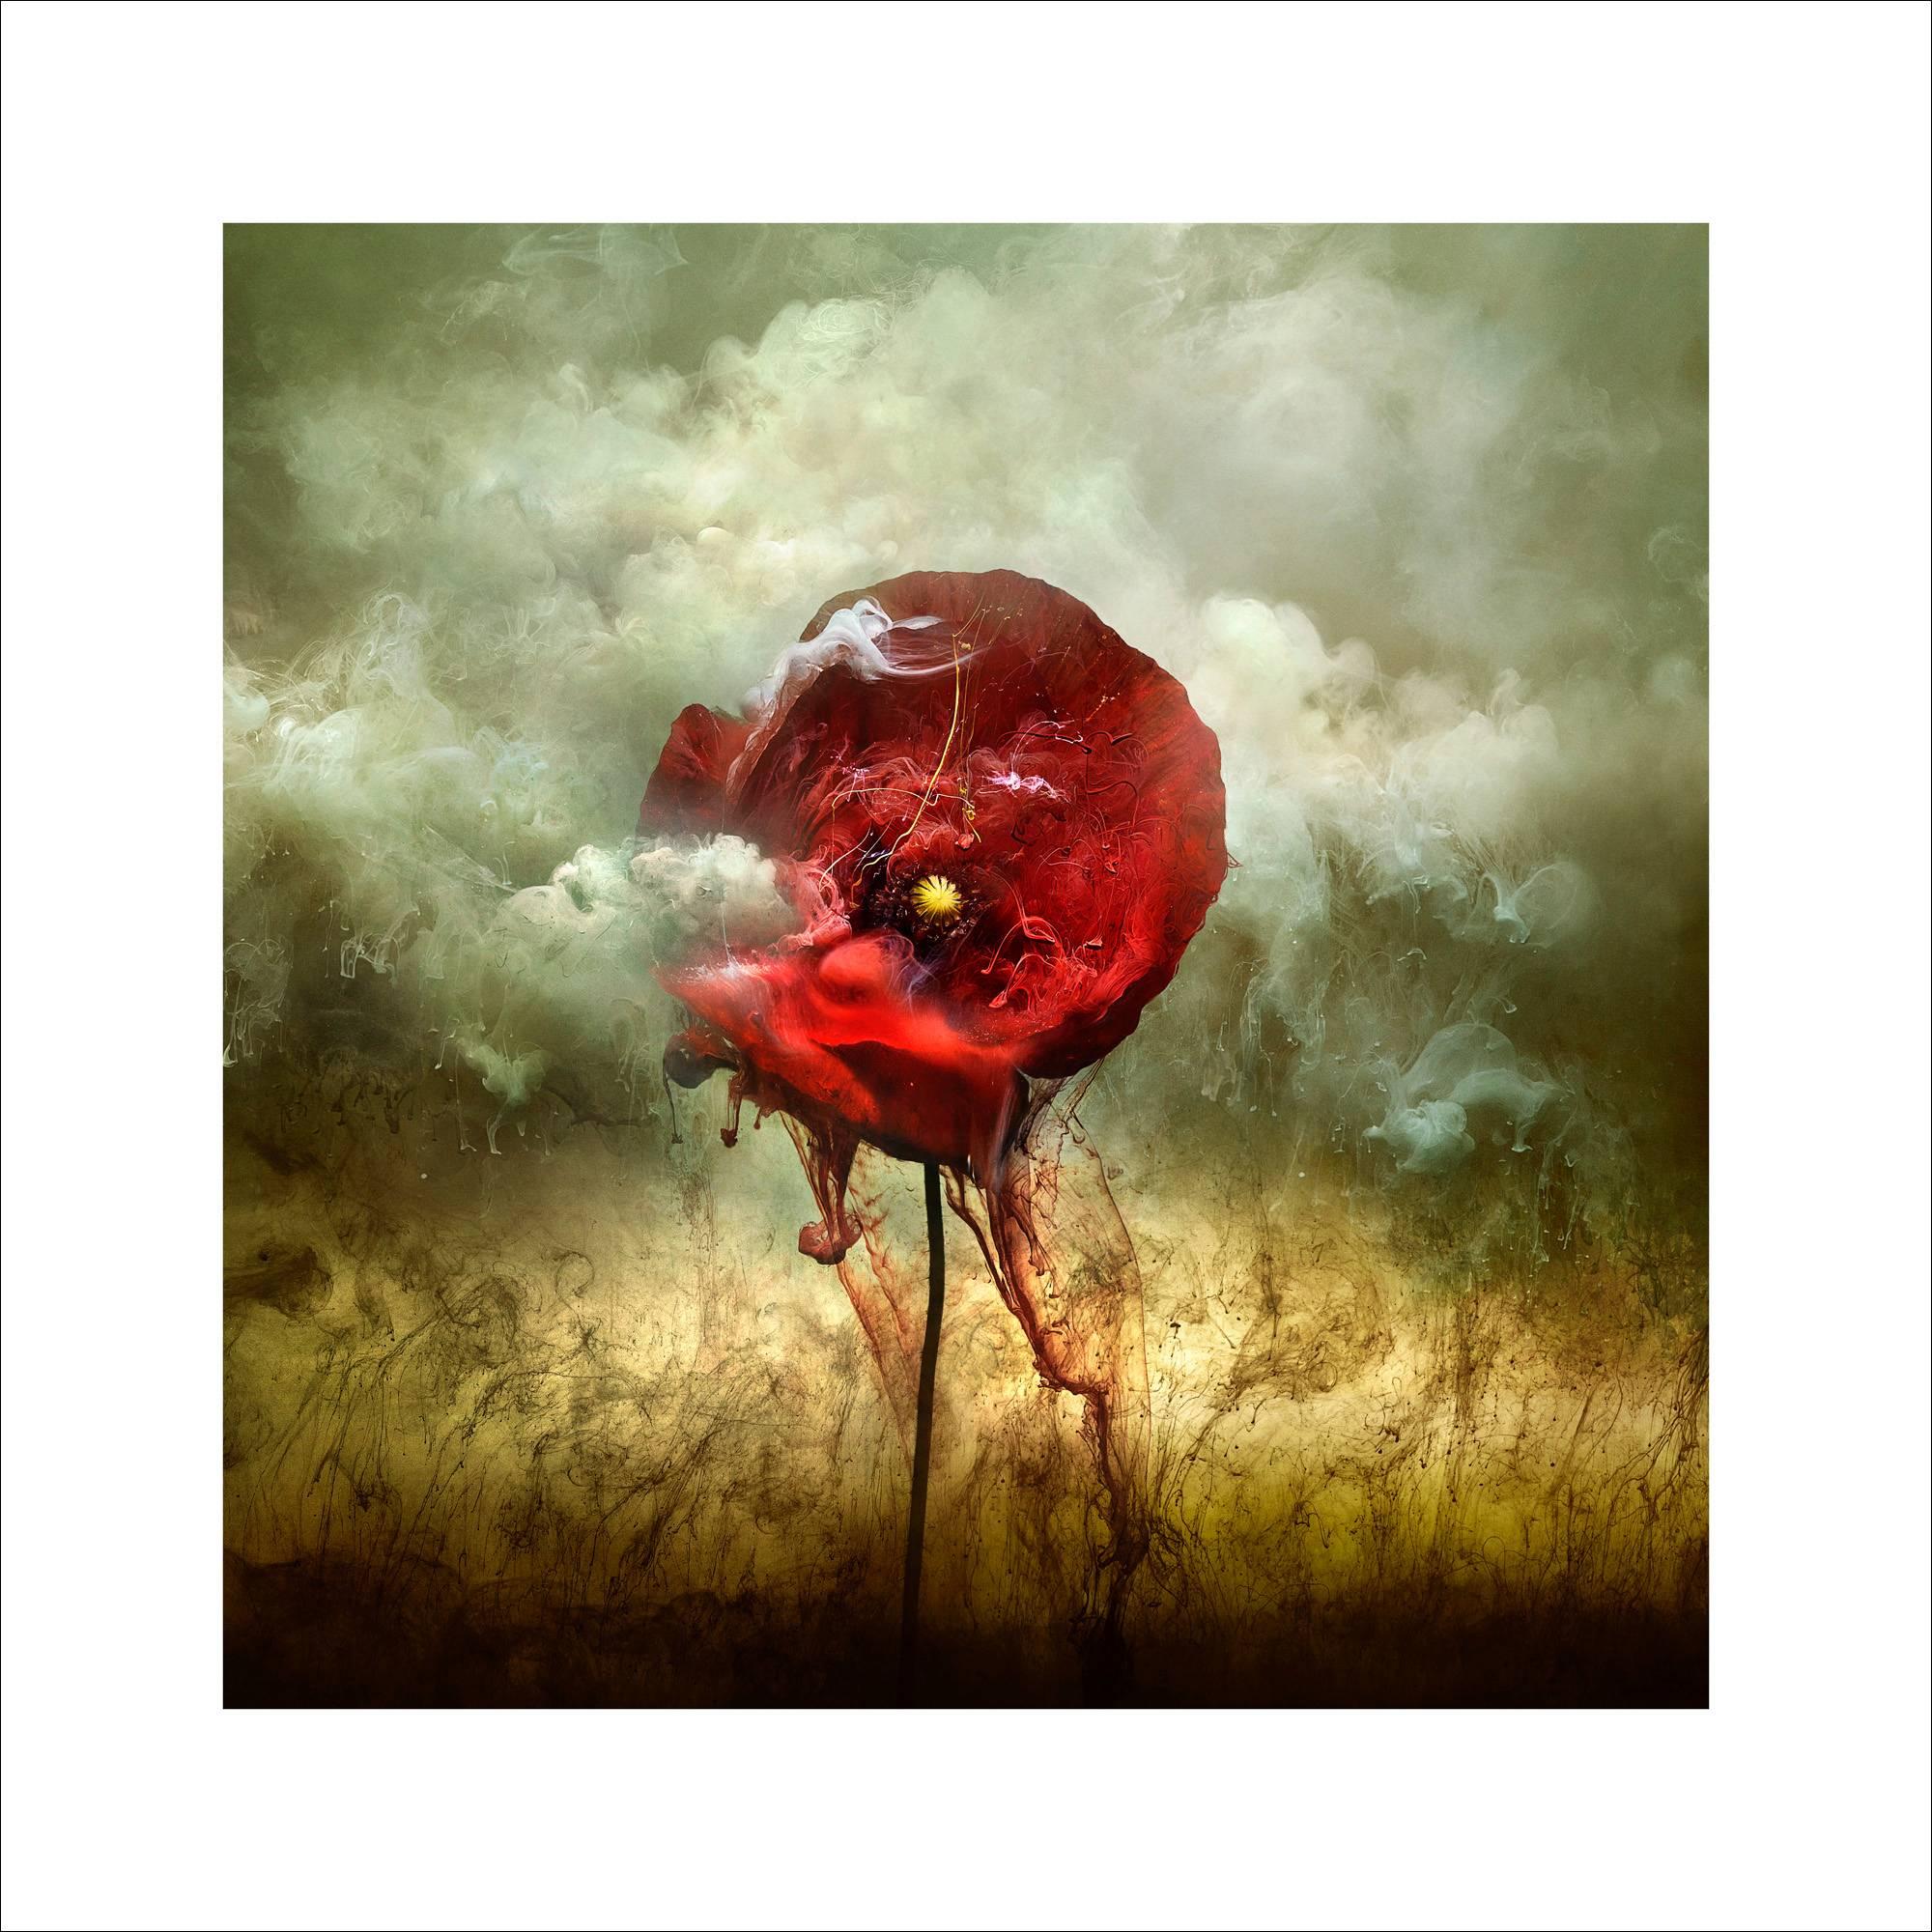 War Poppy 2, 2015 Contemporary Photograph by Giles Revell For Sale